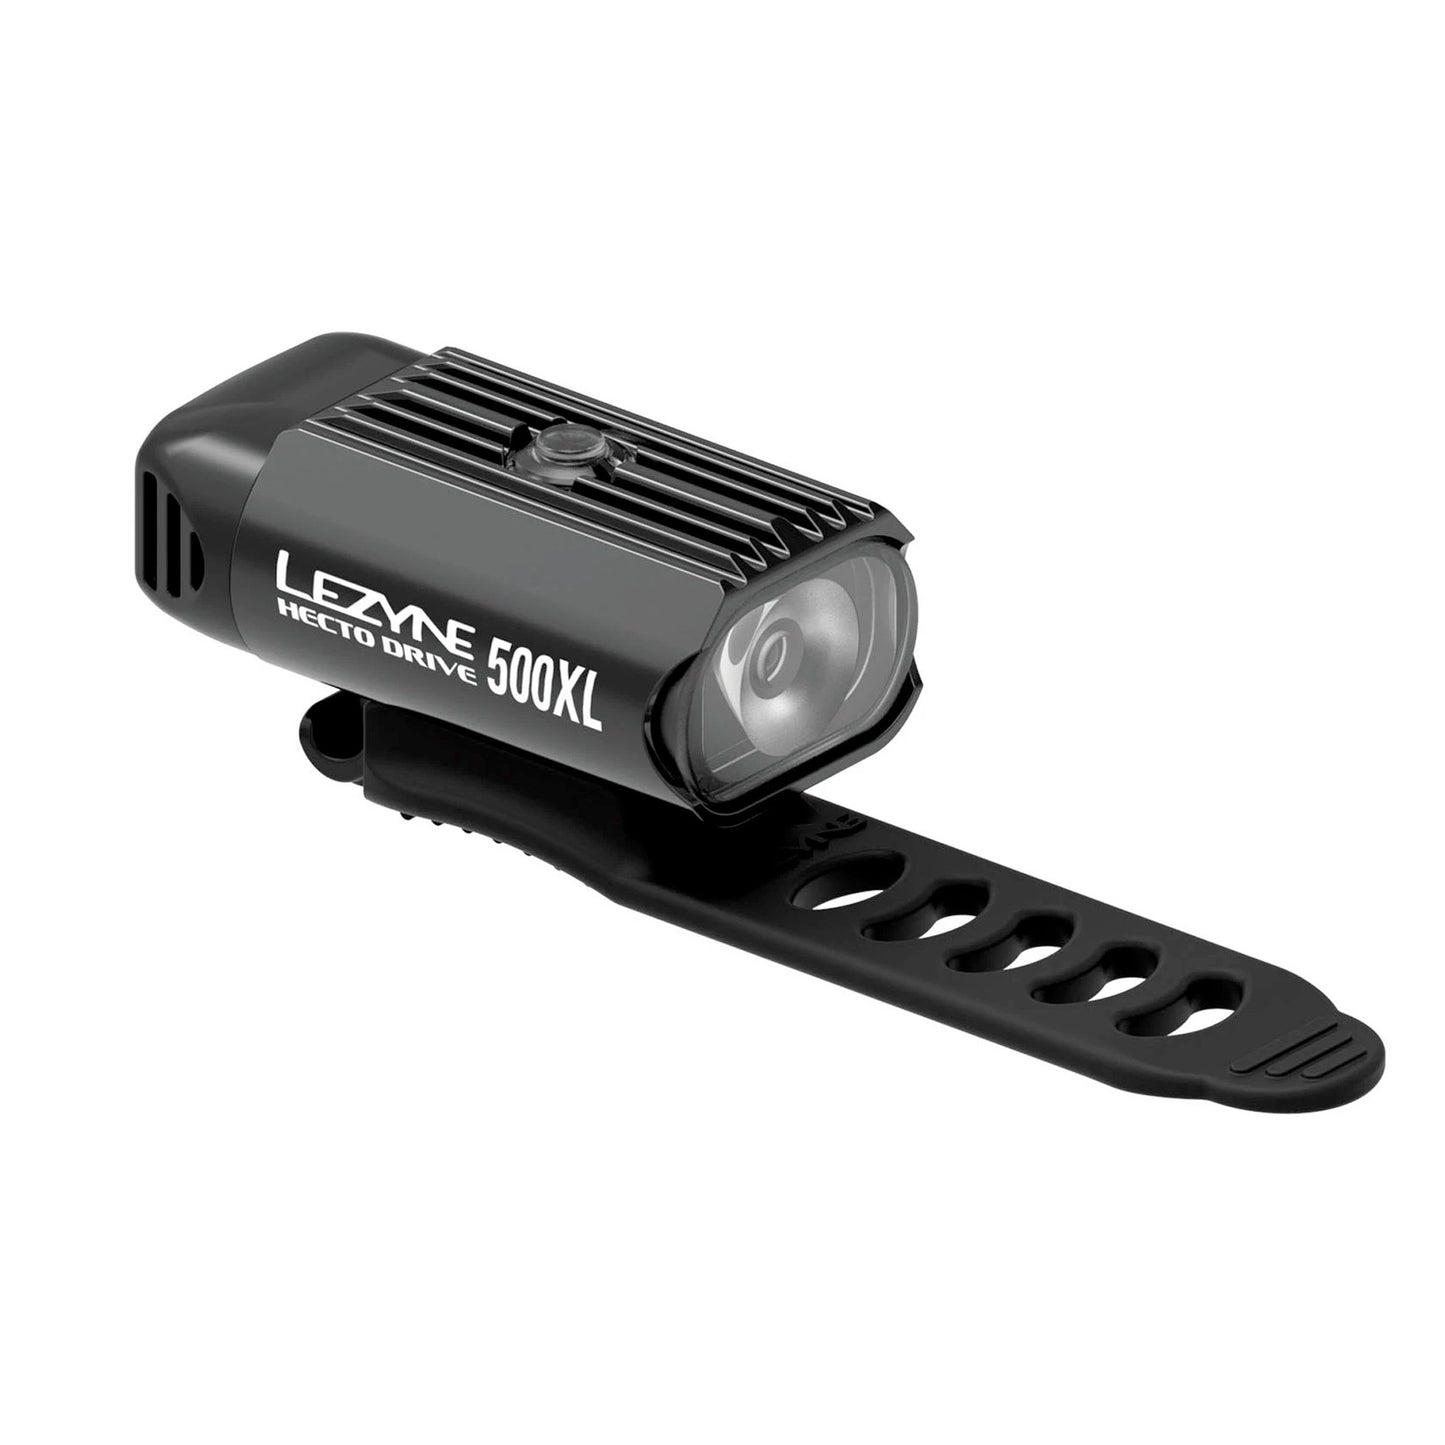 Lezyne Hecto Drive 500XL Front Headlight buy online at Woolys Wheels with free delivery